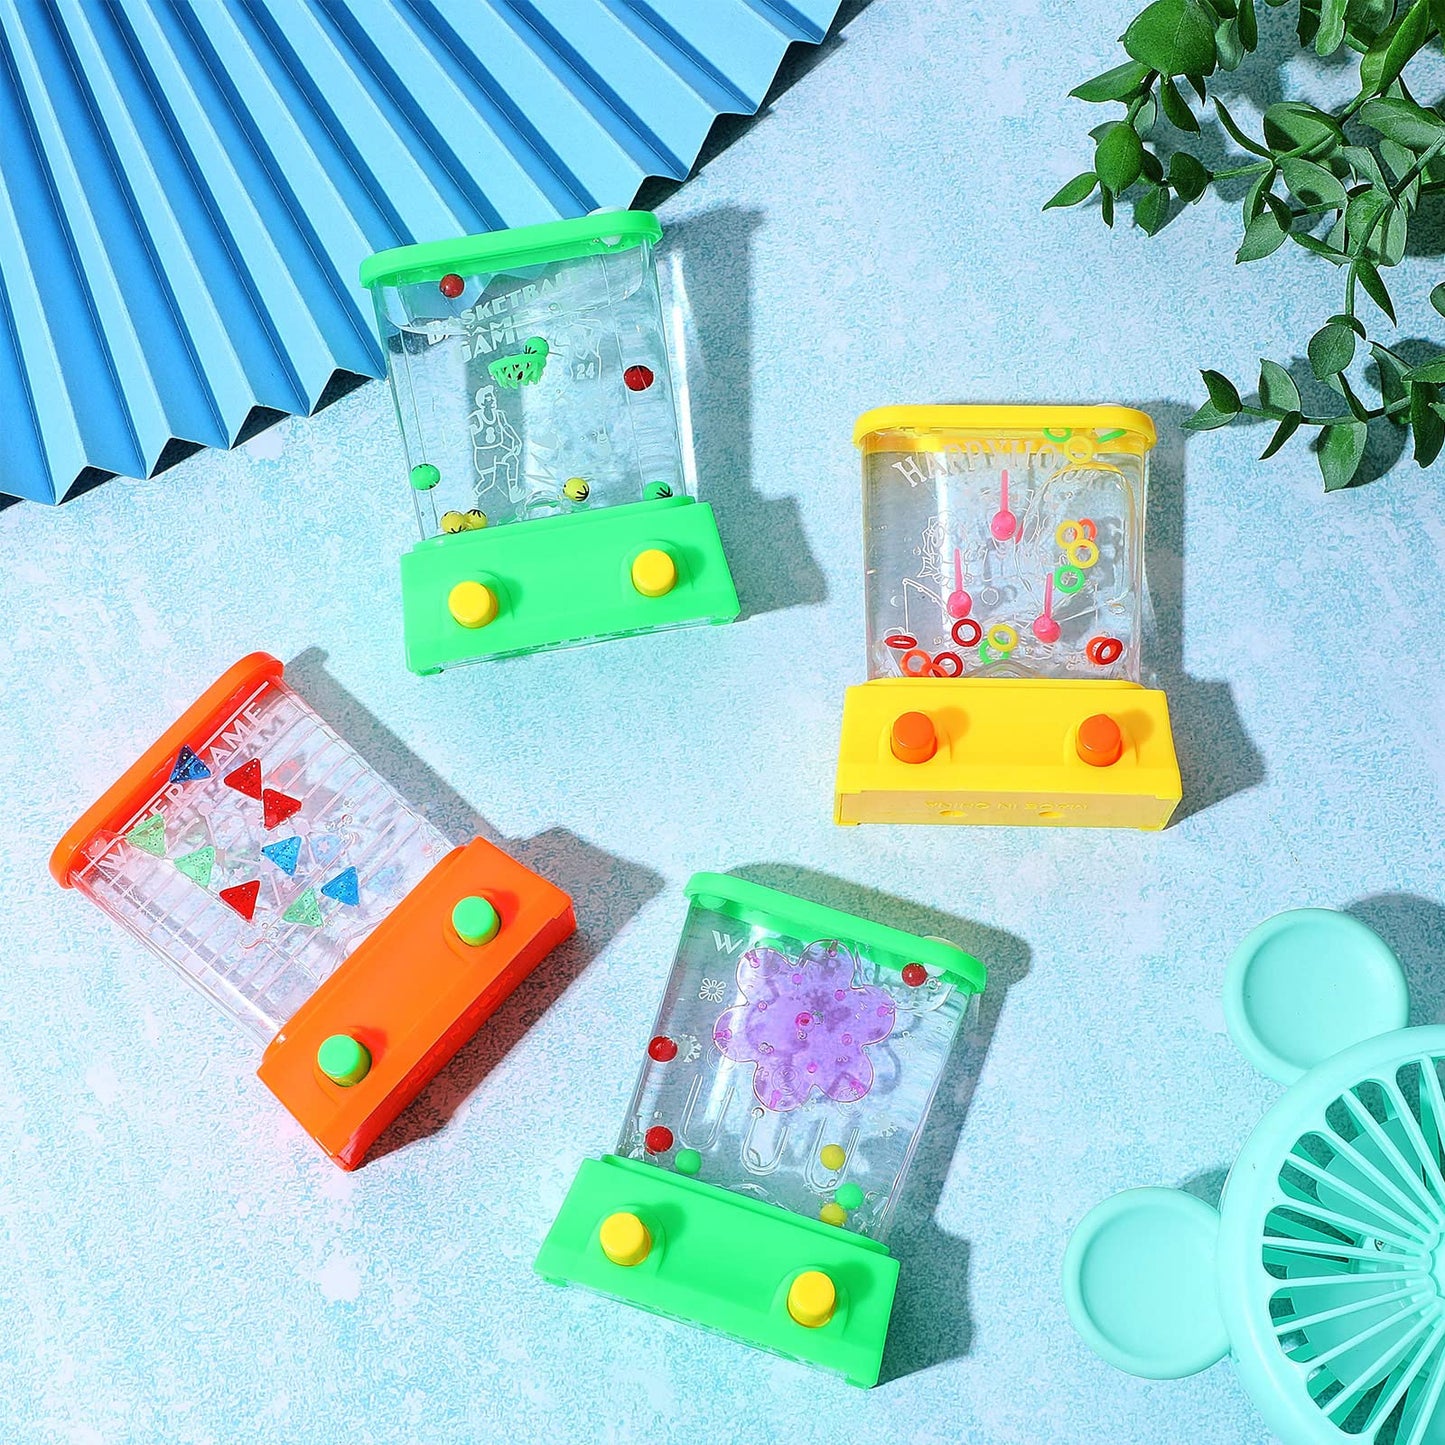 Zhanmai 16Pcs Handheld Water Game Arcade Water Ring Toss Water Tables for Beach Toy Party Favor Fun Game Entertainment, Without Water (Assorted, Stylish) Assorted